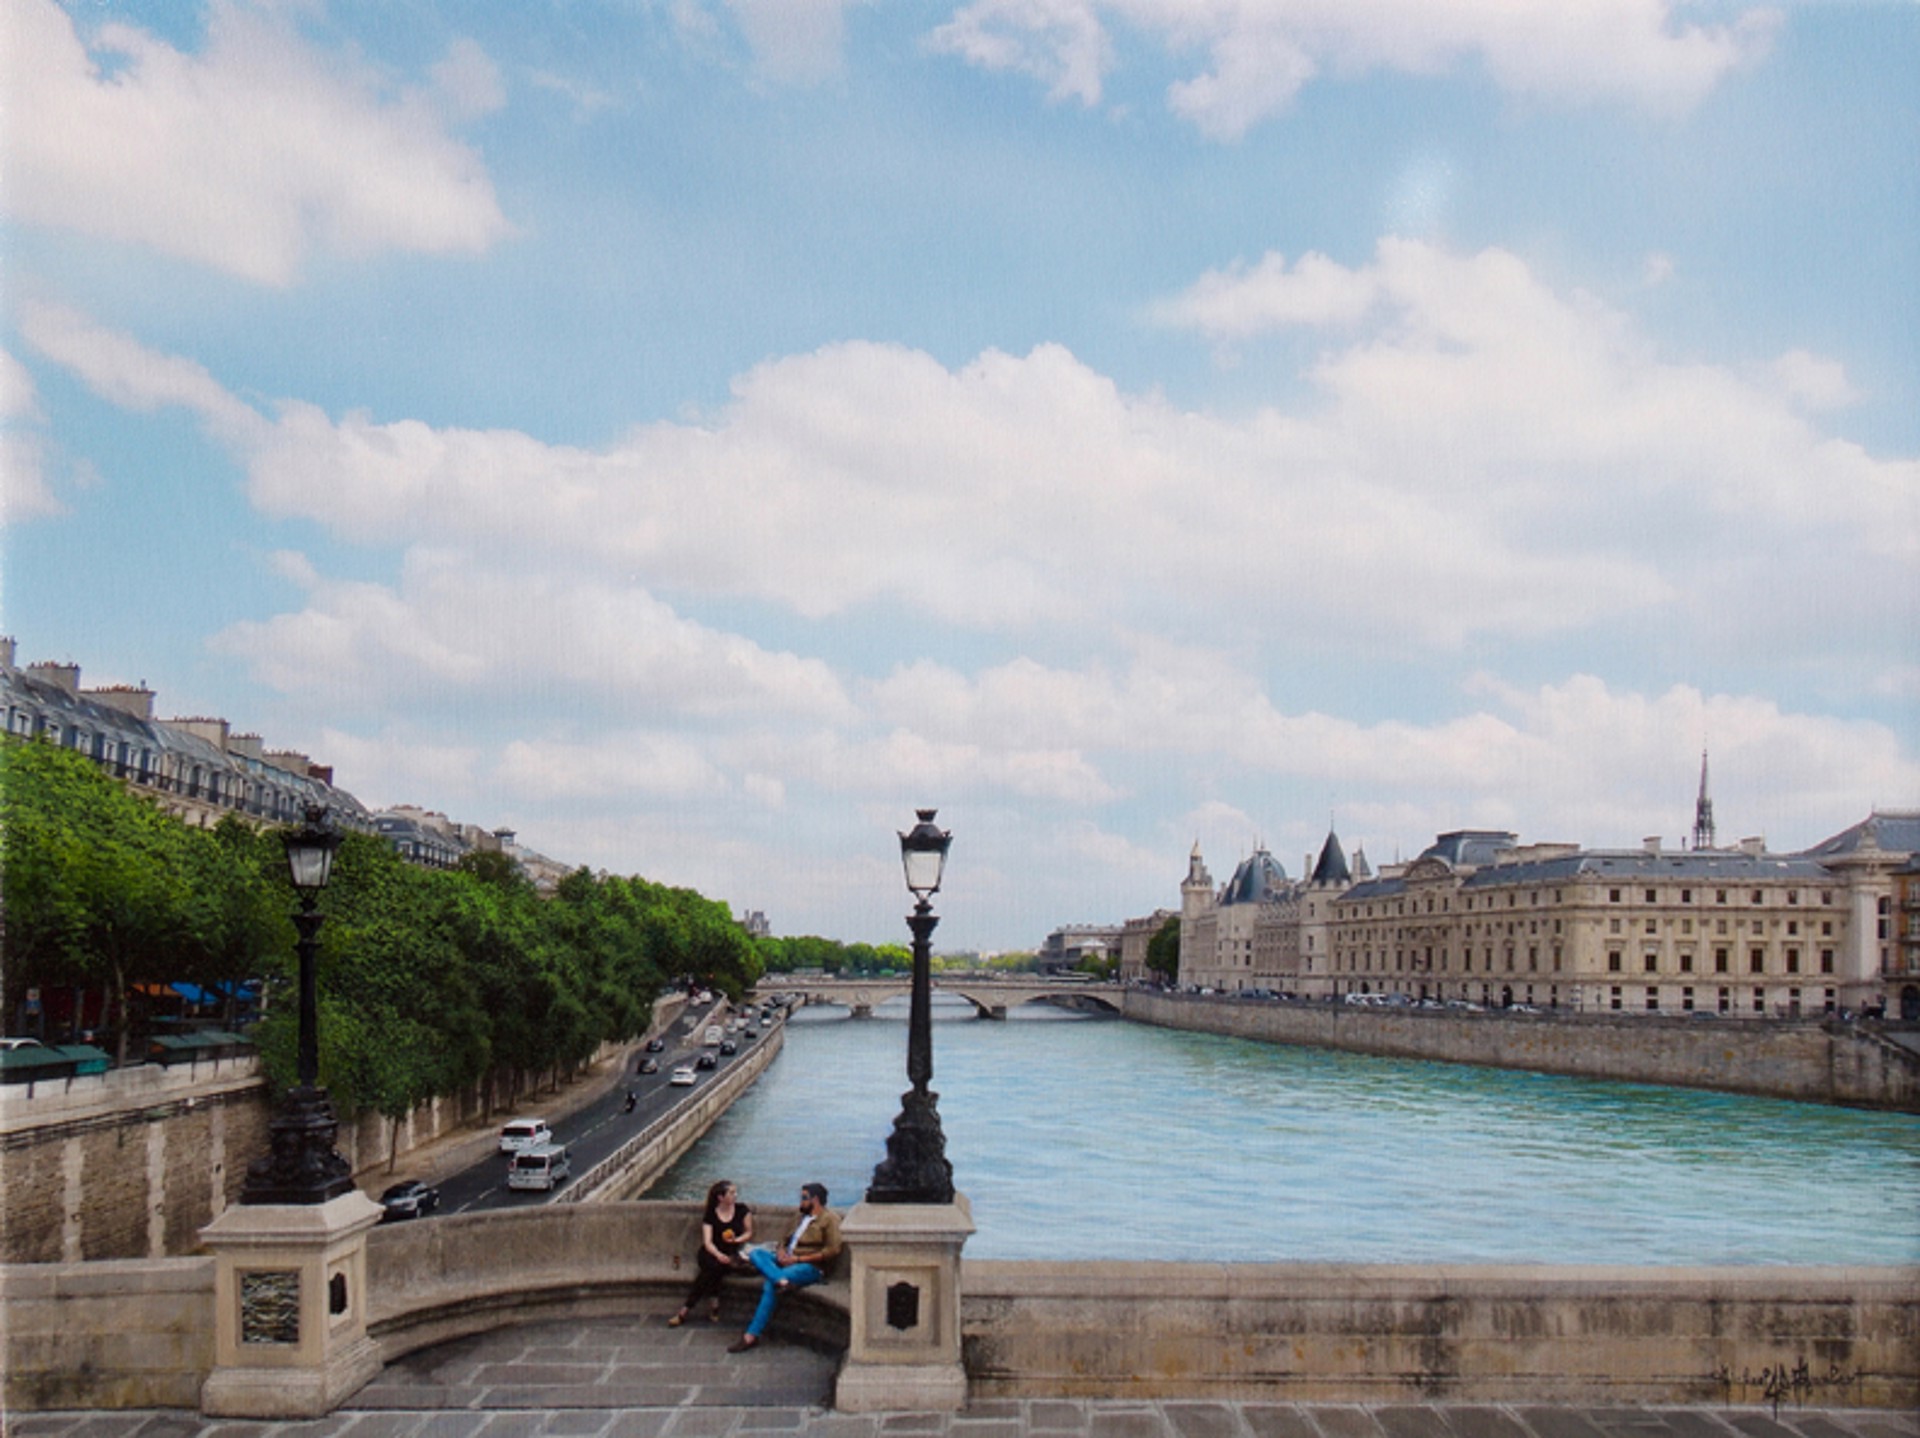 A Beautiful day in Paris by Michael A. F. Gumbert